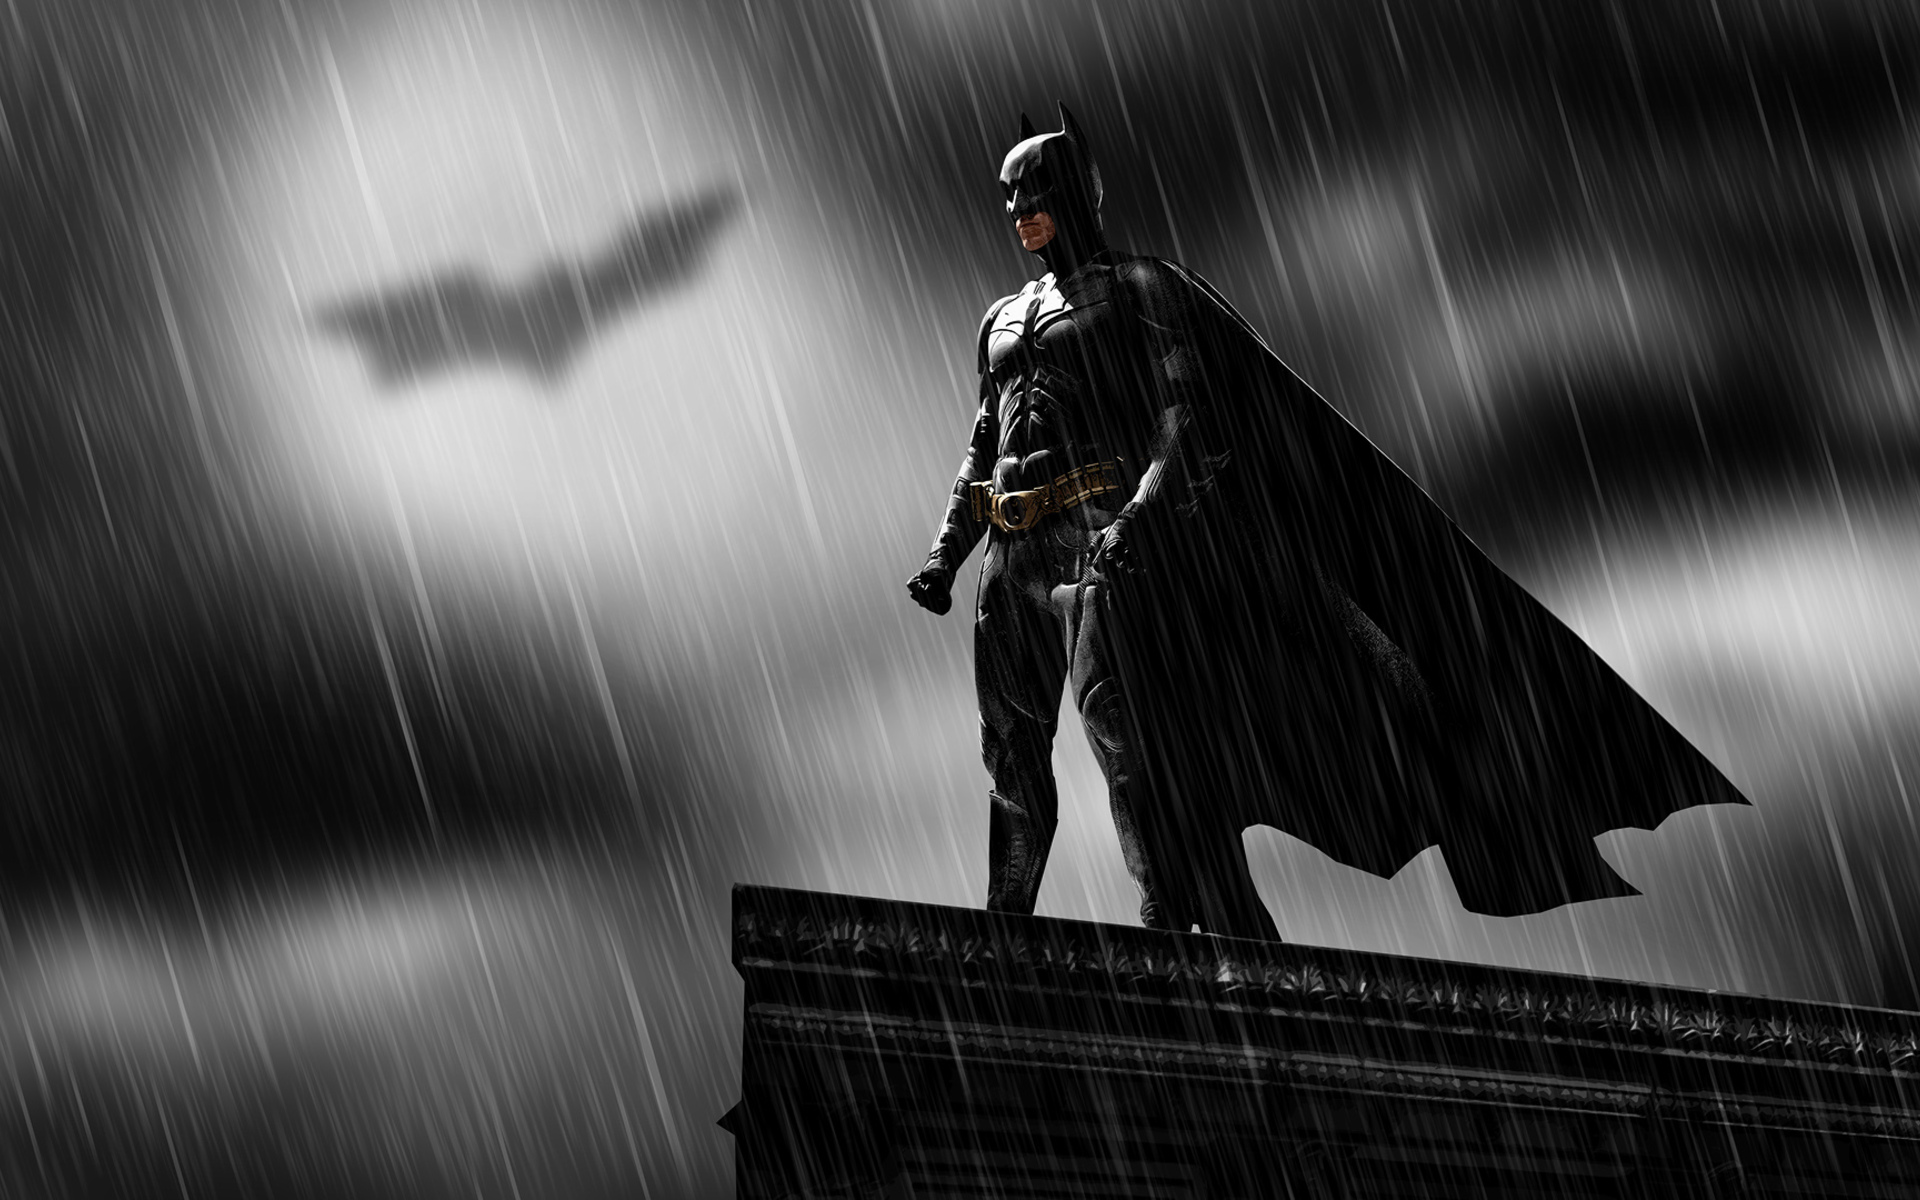 Download Batman wallpapers for mobile phone, free Batman HD pictures